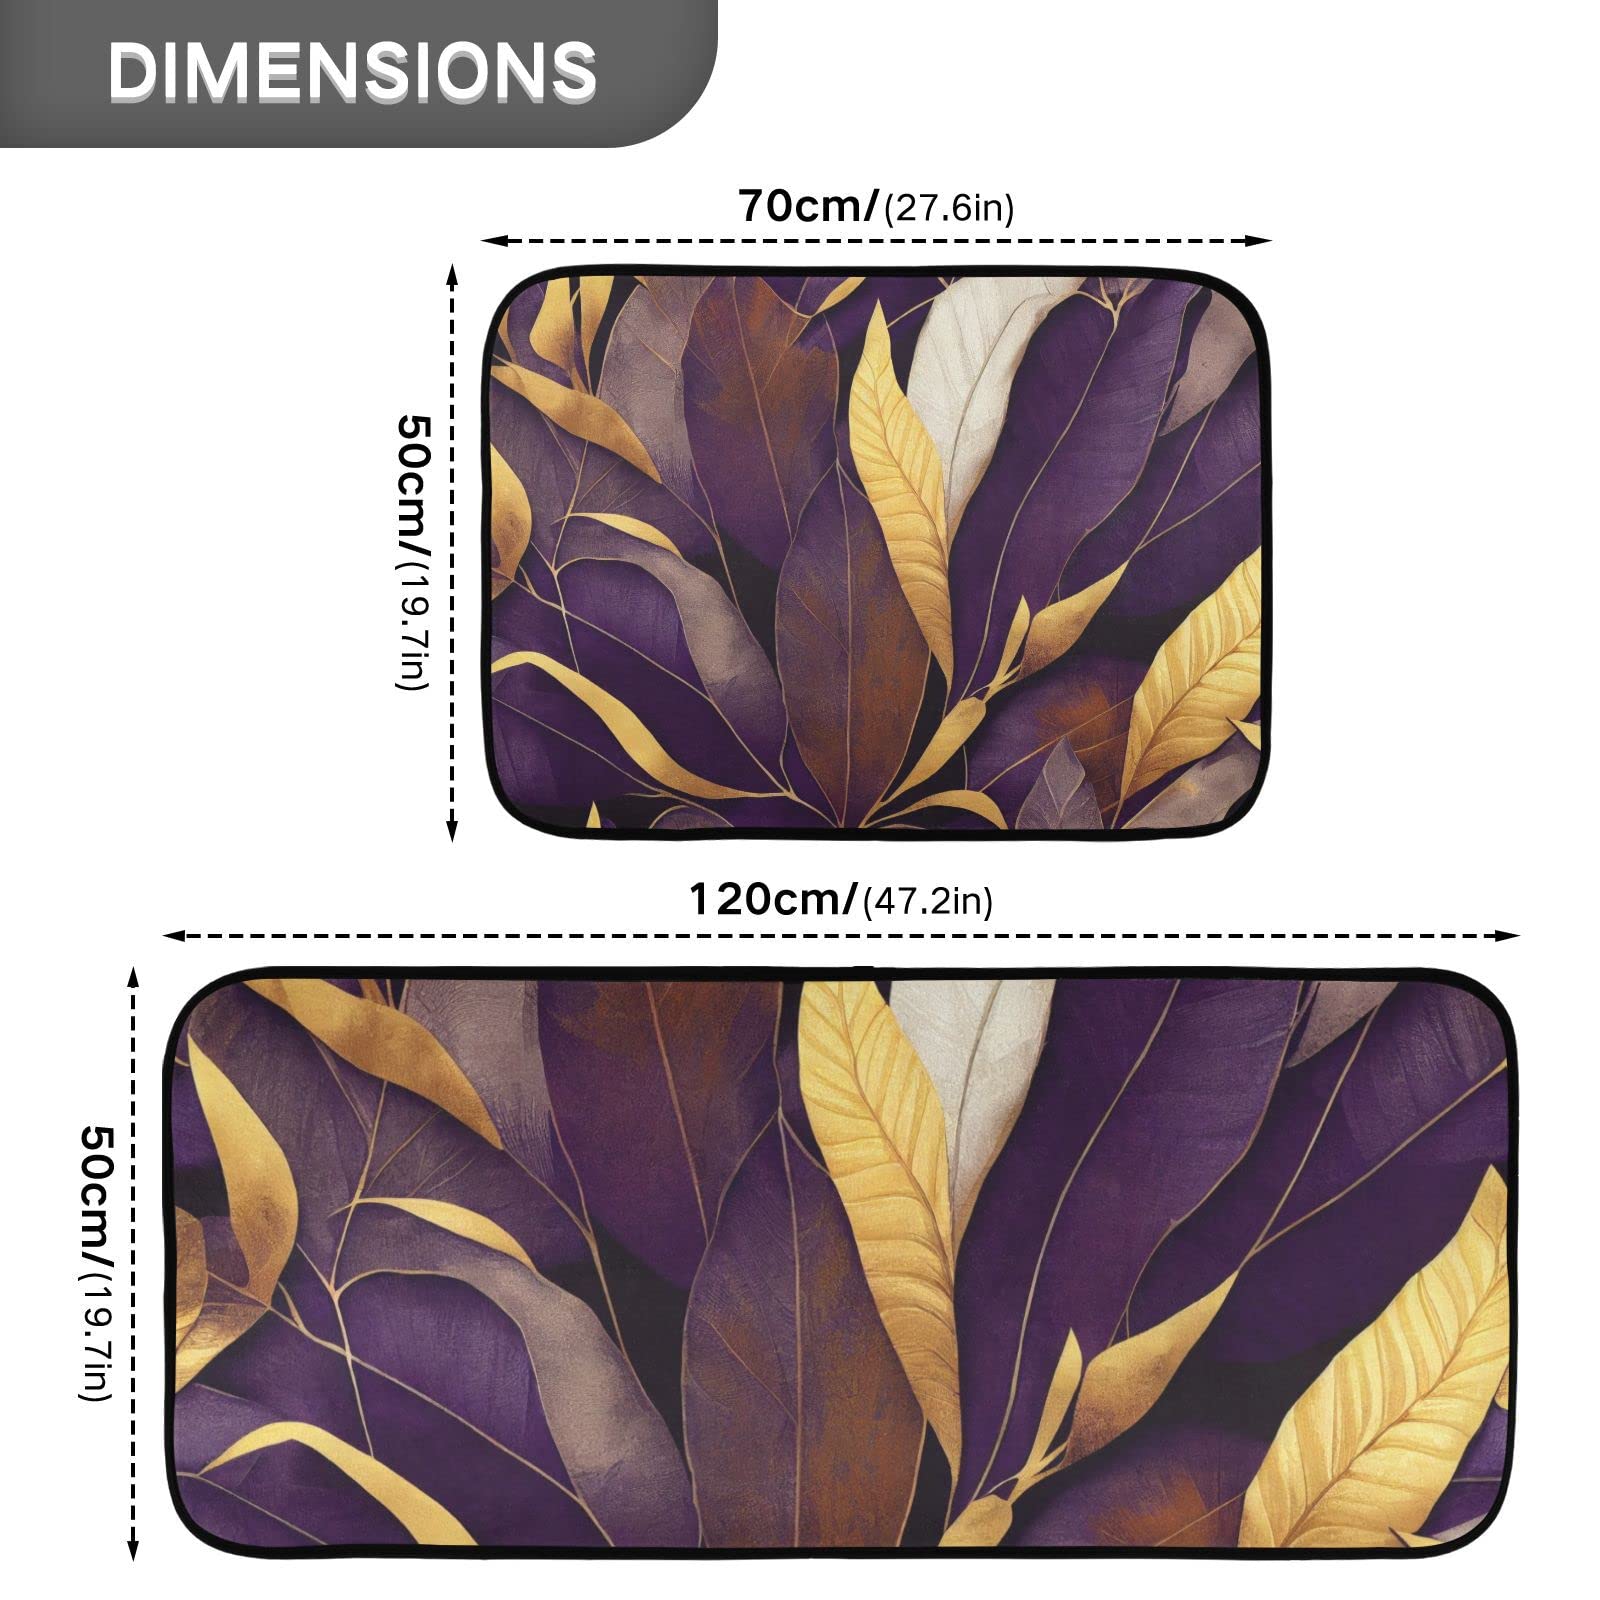 NFMILI (Luxury Purple Leaves) Kitchen Mat 2 PCS Cushioned Anti-Fatigue Kitchen Rug, Waterproof Non-Slip Floor Mats Thick Ergonomic Comfort Standing Mat for Kitchen Sink Laundry room bedroom living roo